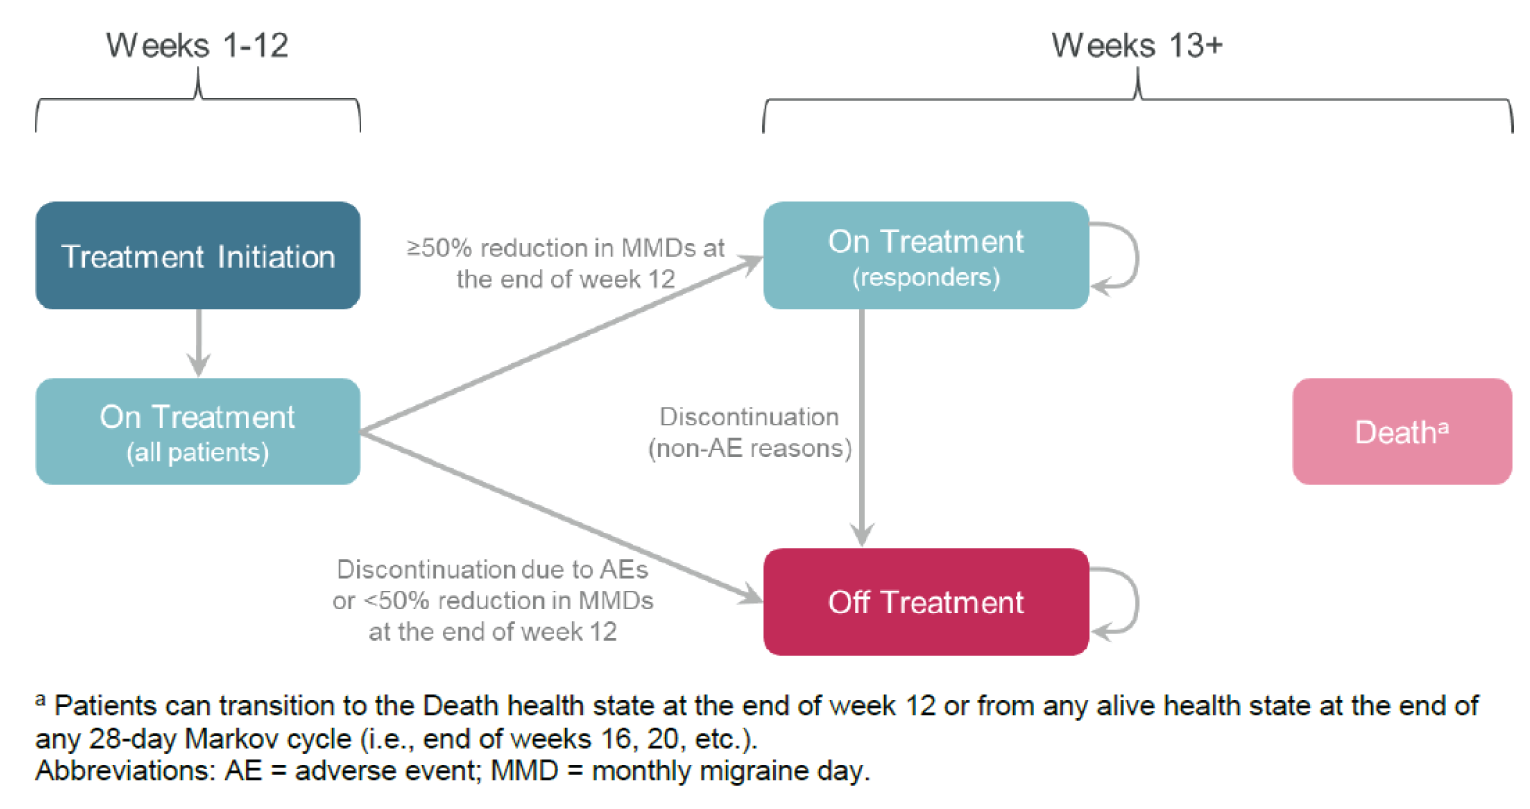 Alt text: Diagram of a decision model that is divided into 2 parts. On the left, part 1 describes events occurring in weeks 1 to 12, where patients move from “treatment initiation” to “on treatment (all patients)”. On the right, part 2 describes events occurring in weeks 13 and later. In this second part, patients may move from “on treatment (all patients)” to either “on treatment (responders)” — if they experience a 50% or greater reduction in monthly migraine days at the end of week 12 — or to “off treatment” (all other patients, including those who experience adverse events). Patients may move from “on treatment (responders)” to “off treatment” if they discontinue for reasons other than adverse events. A “death” state is also present.